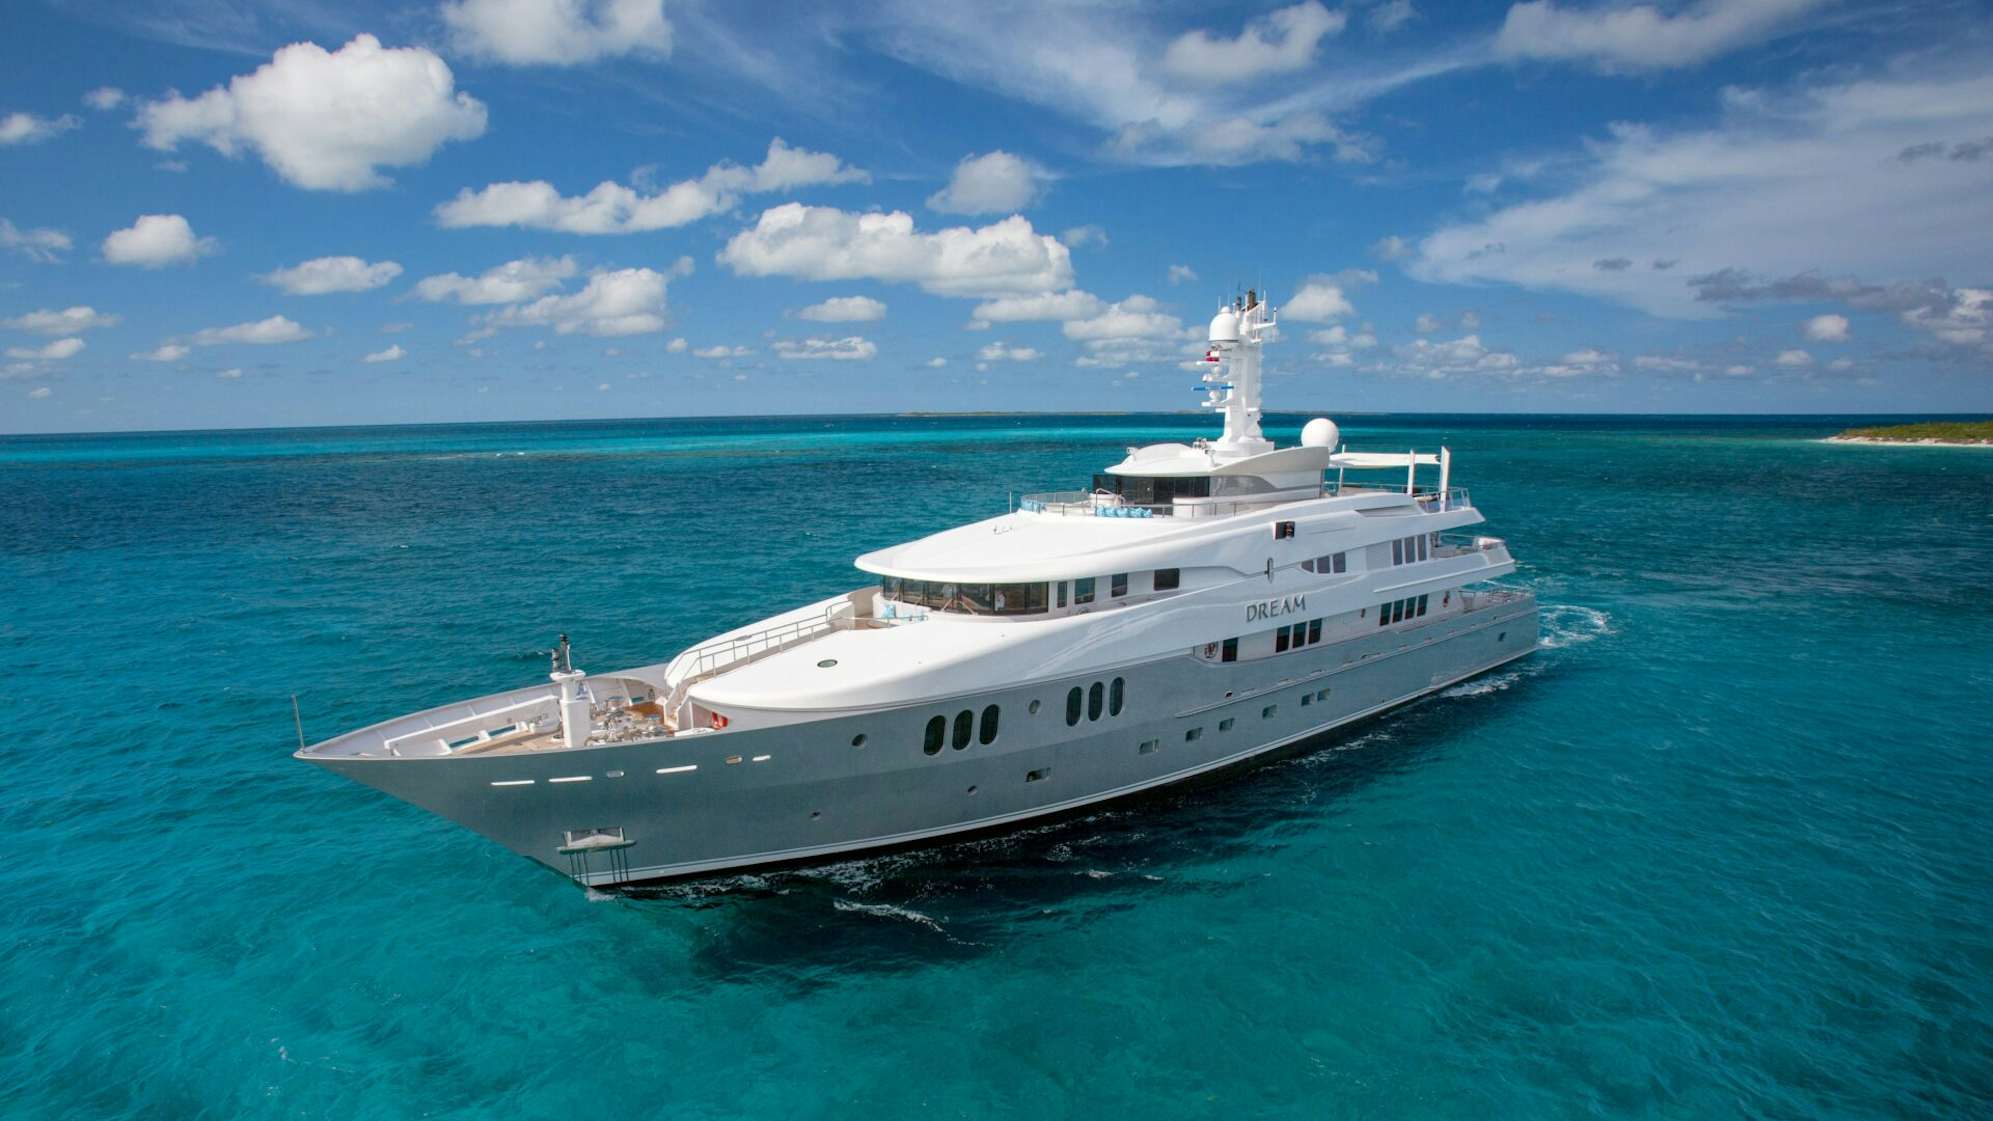 Abeking & Rasmussen luxury yacht 'DREAM' sailing near a tropical island with clear blue waters and a sunny sky.